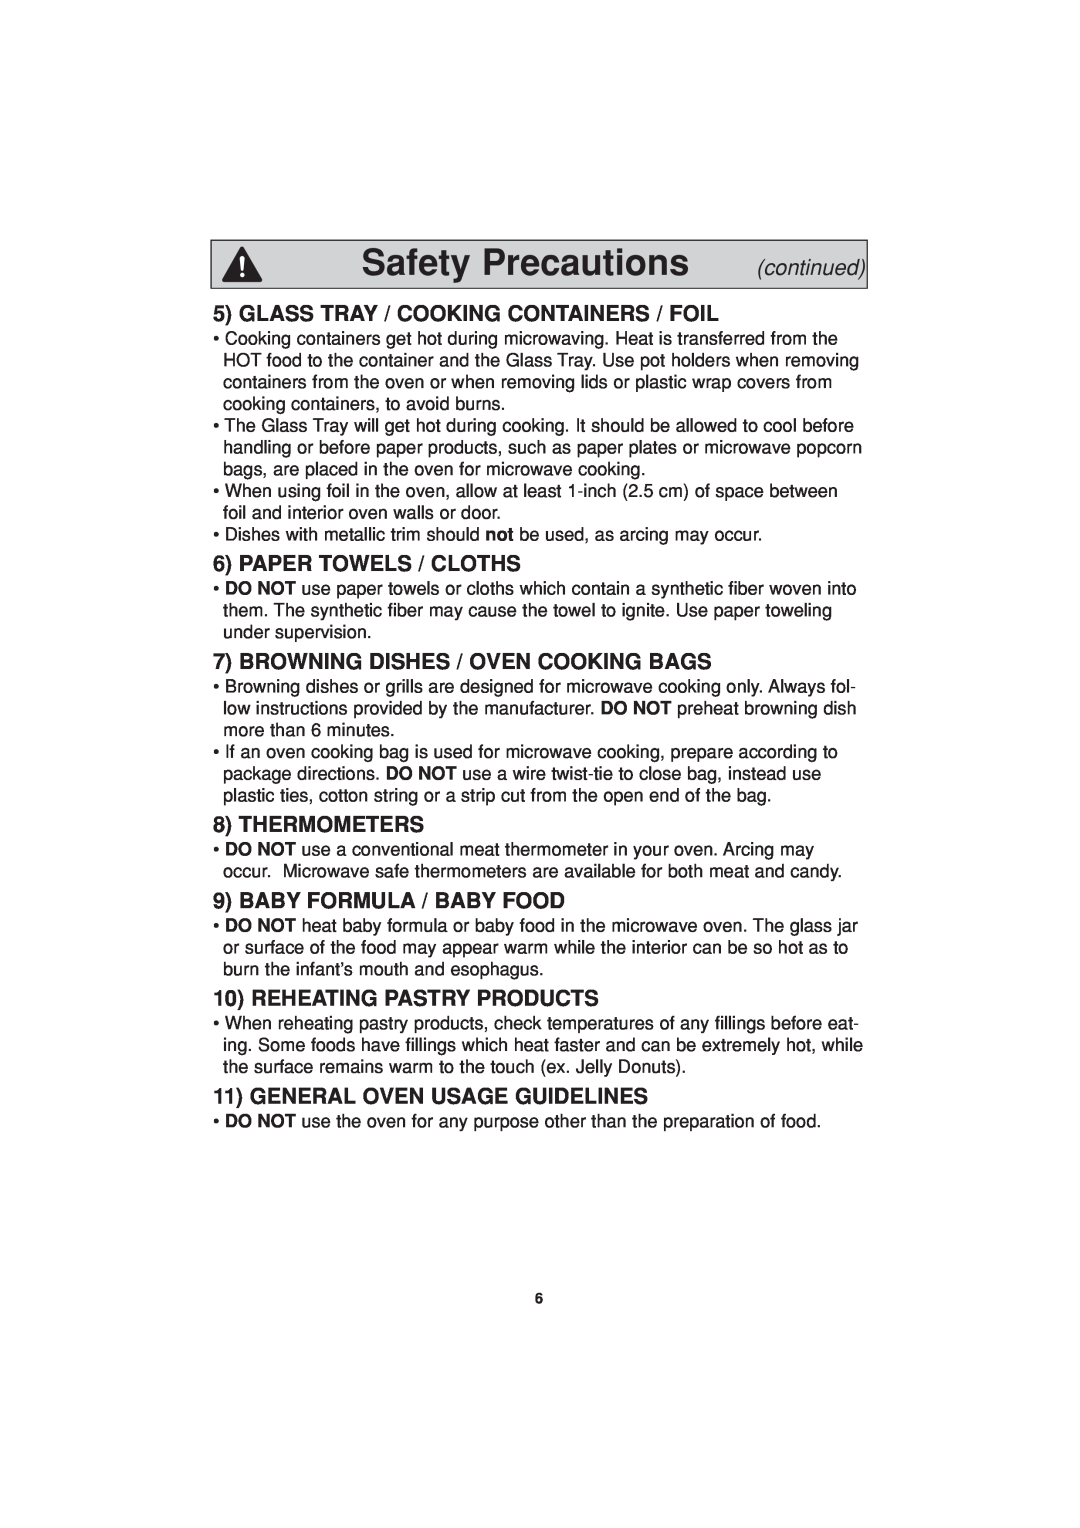 Panasonic NN-H504, NN-H614 Safety Precautions, Glass Tray / Cooking Containers / Foil, Paper Towels / Cloths, Thermometers 